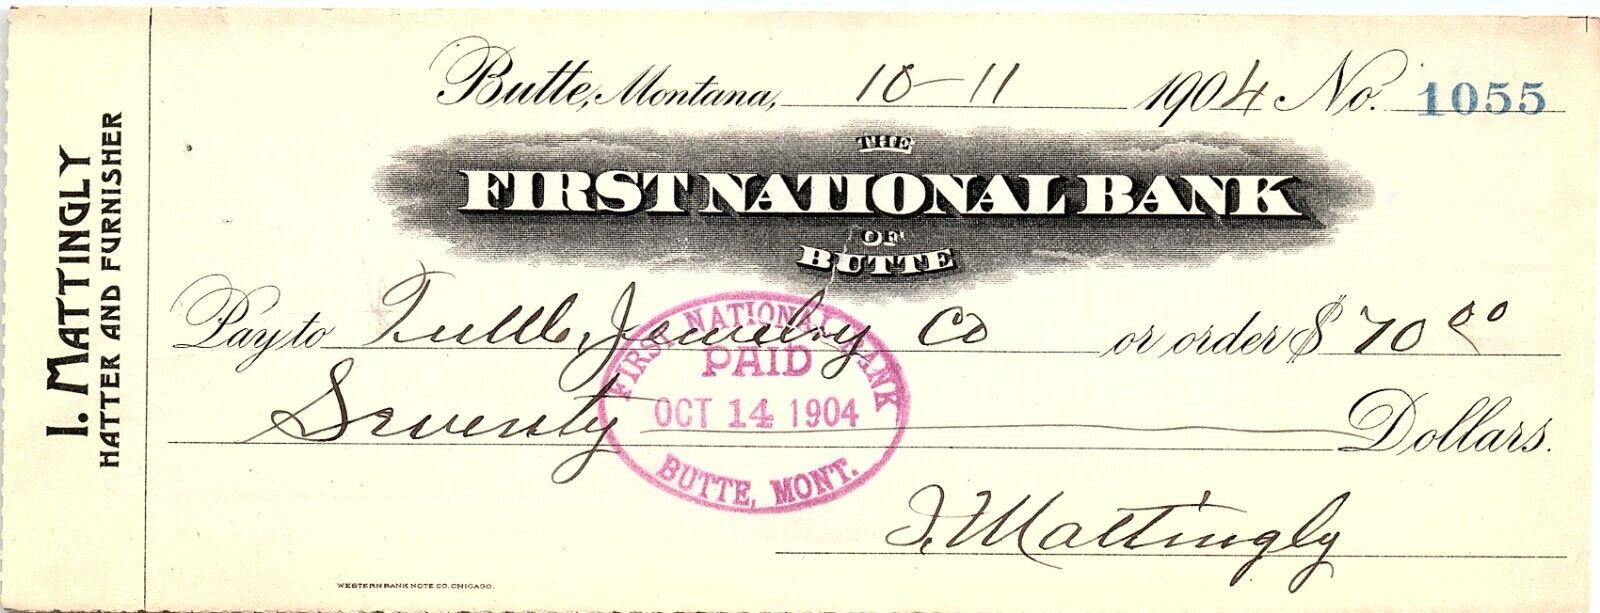 1904 BUTTE MONTANA I. MATTINGLY HATTER AND FURNISHER FIRST NATIONAL CHECK Z1601